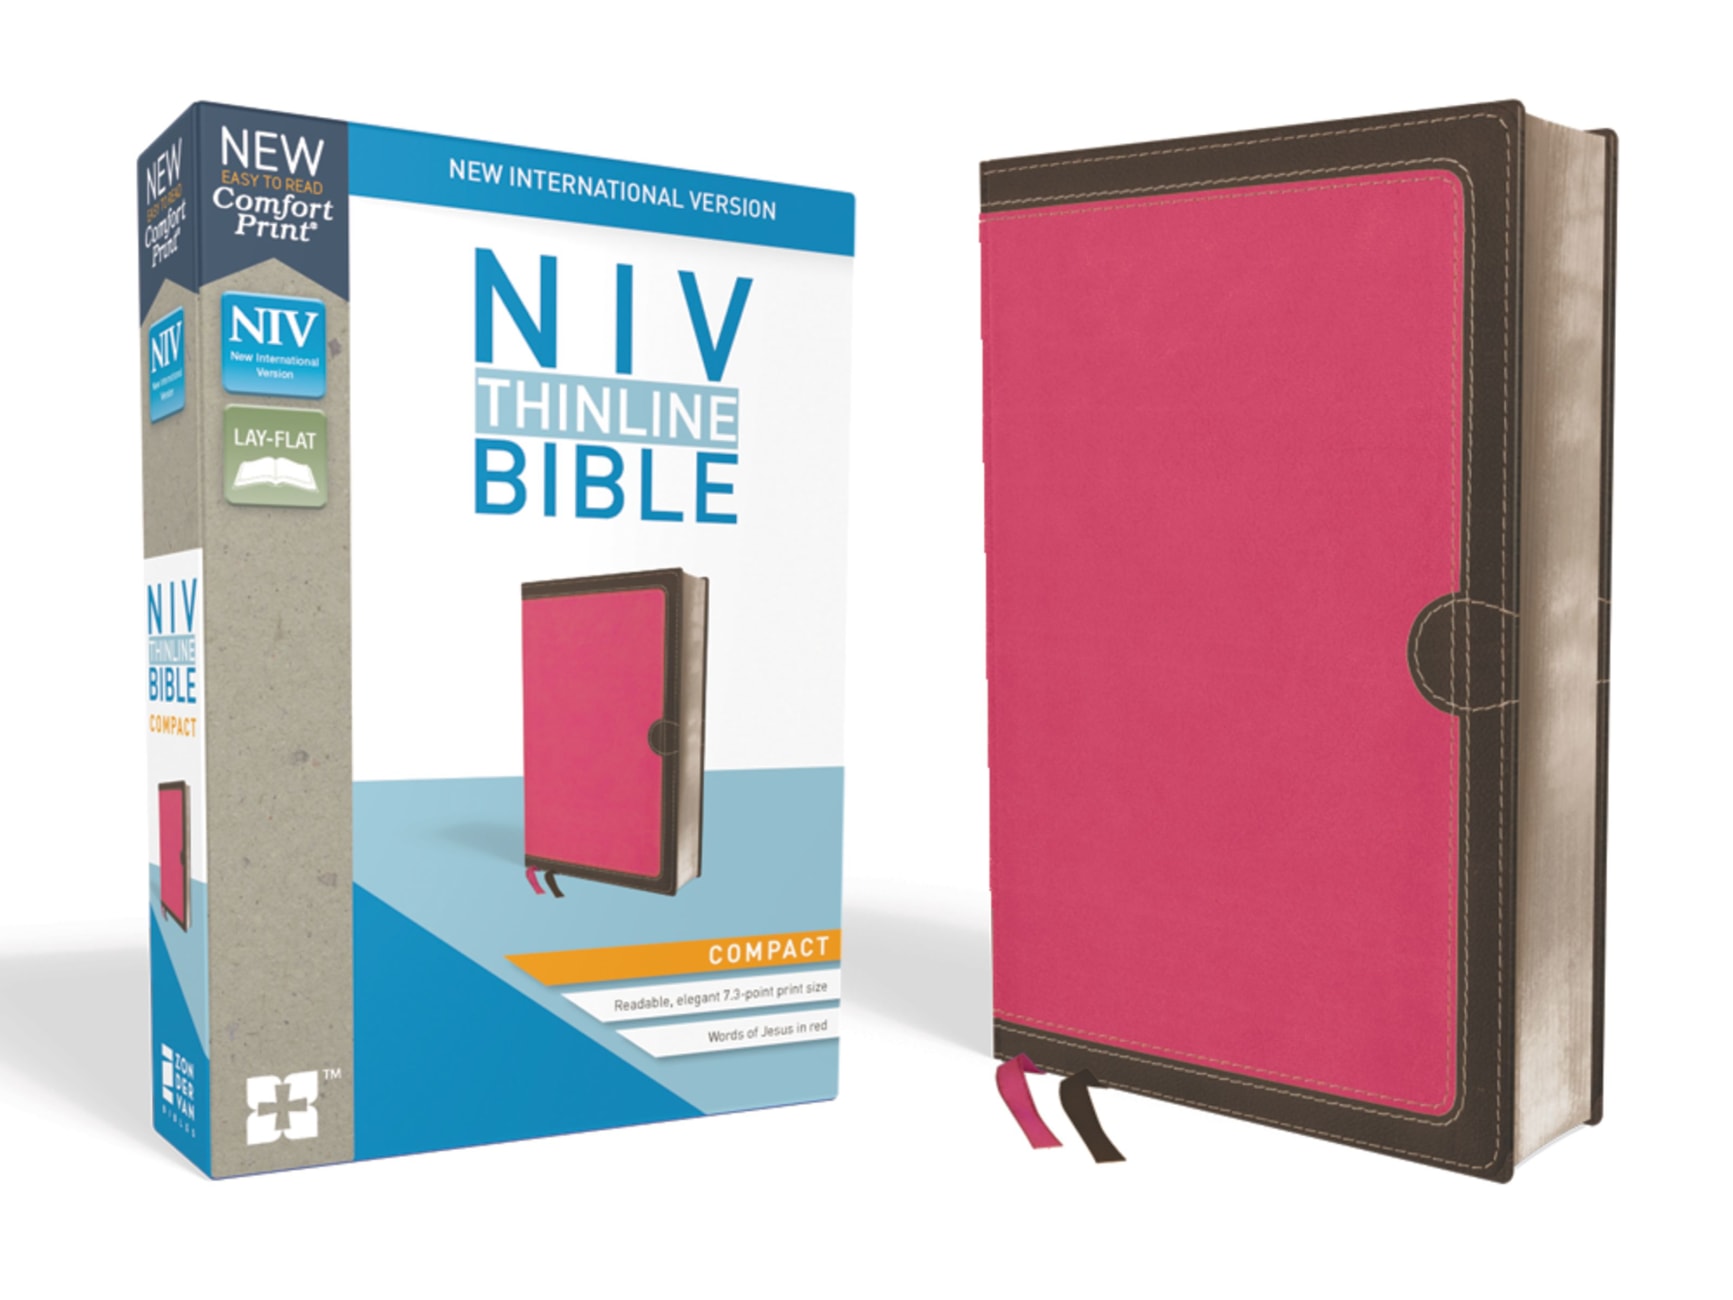 NIV Thinline Bible Compact Pink/Brown (Red Letter Edition) Premium Imitation Leather